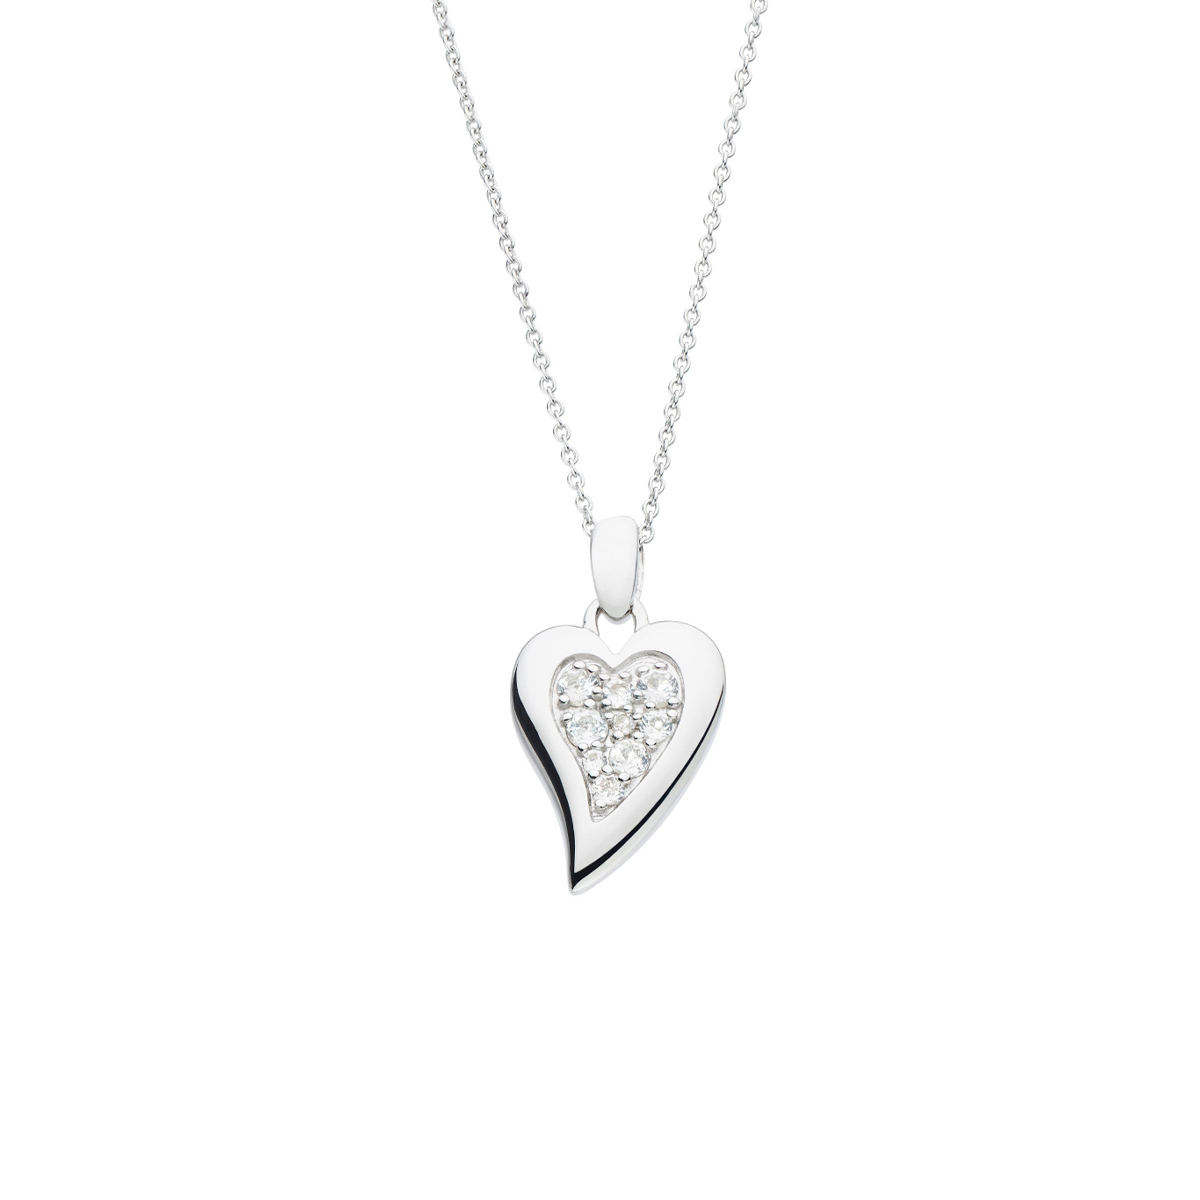 Sterling Silver Desire White Topaz Heart Pendant with Chain